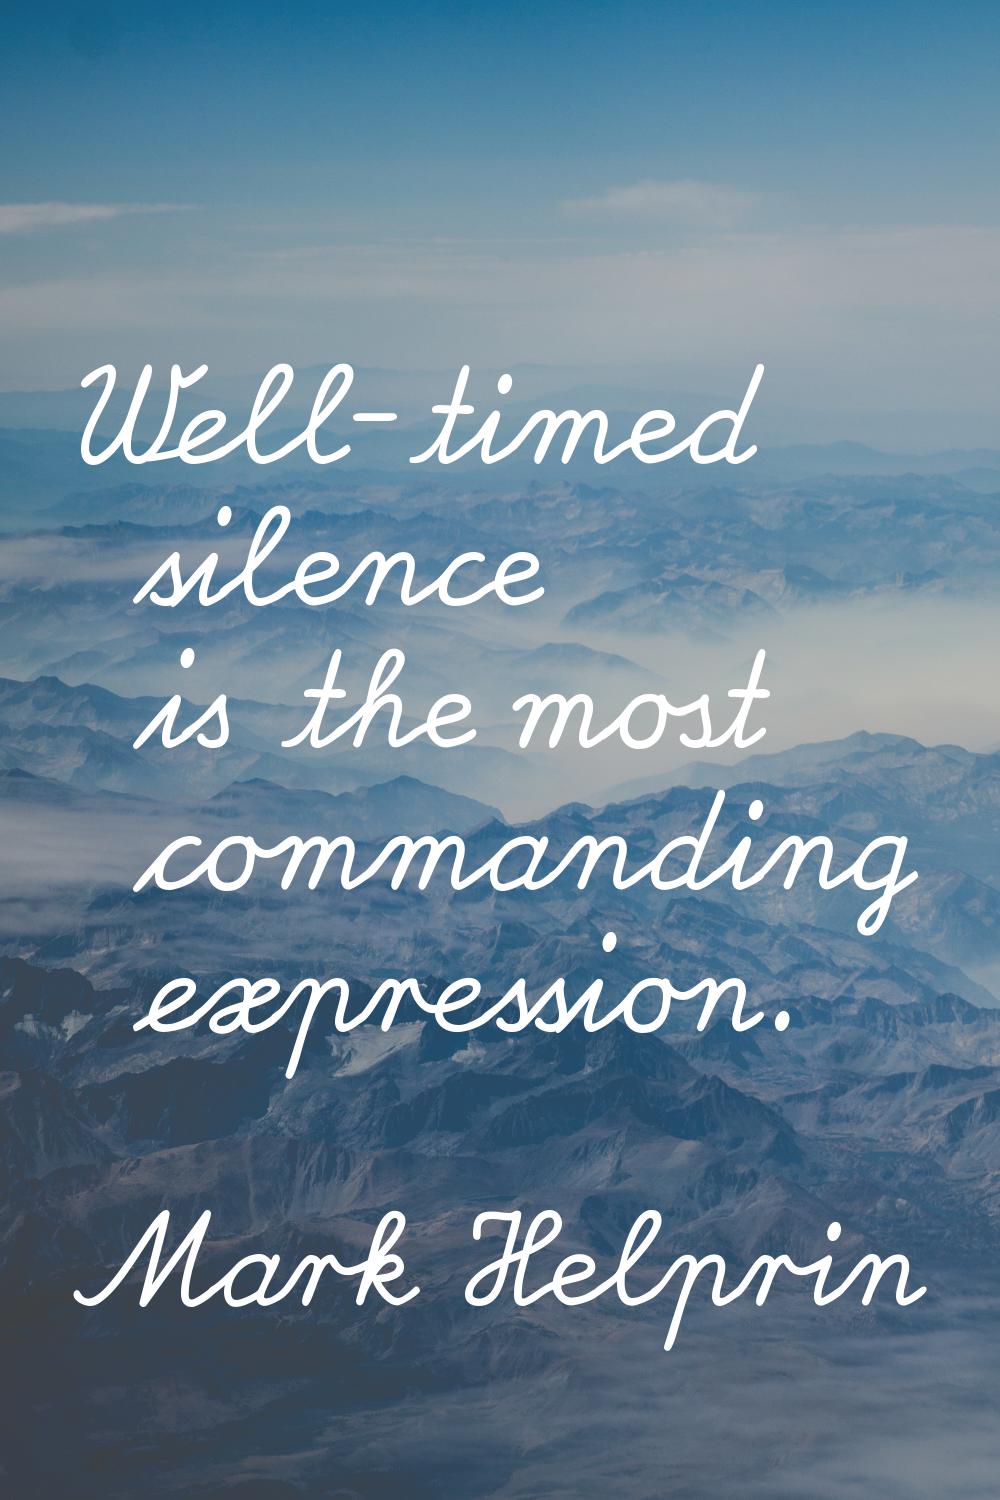 Well-timed silence is the most commanding expression.